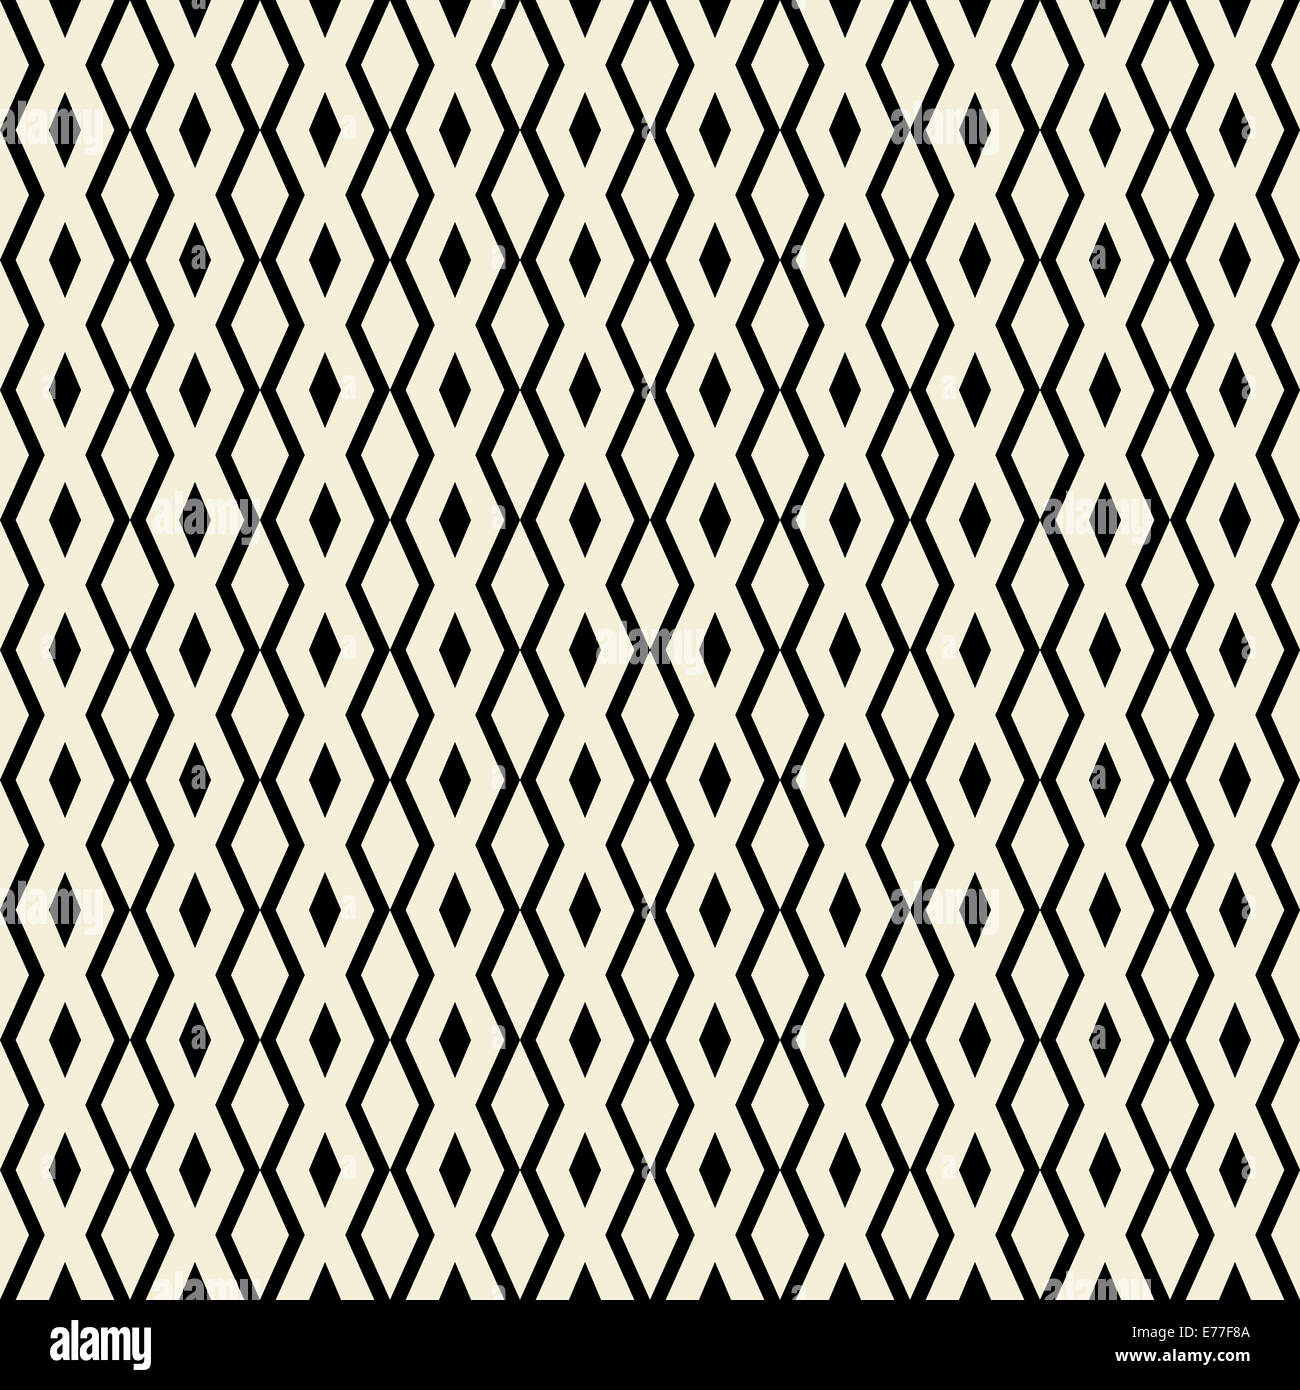 Retro seamless pattern with triangle, rhombus  shapes. Stock Photo